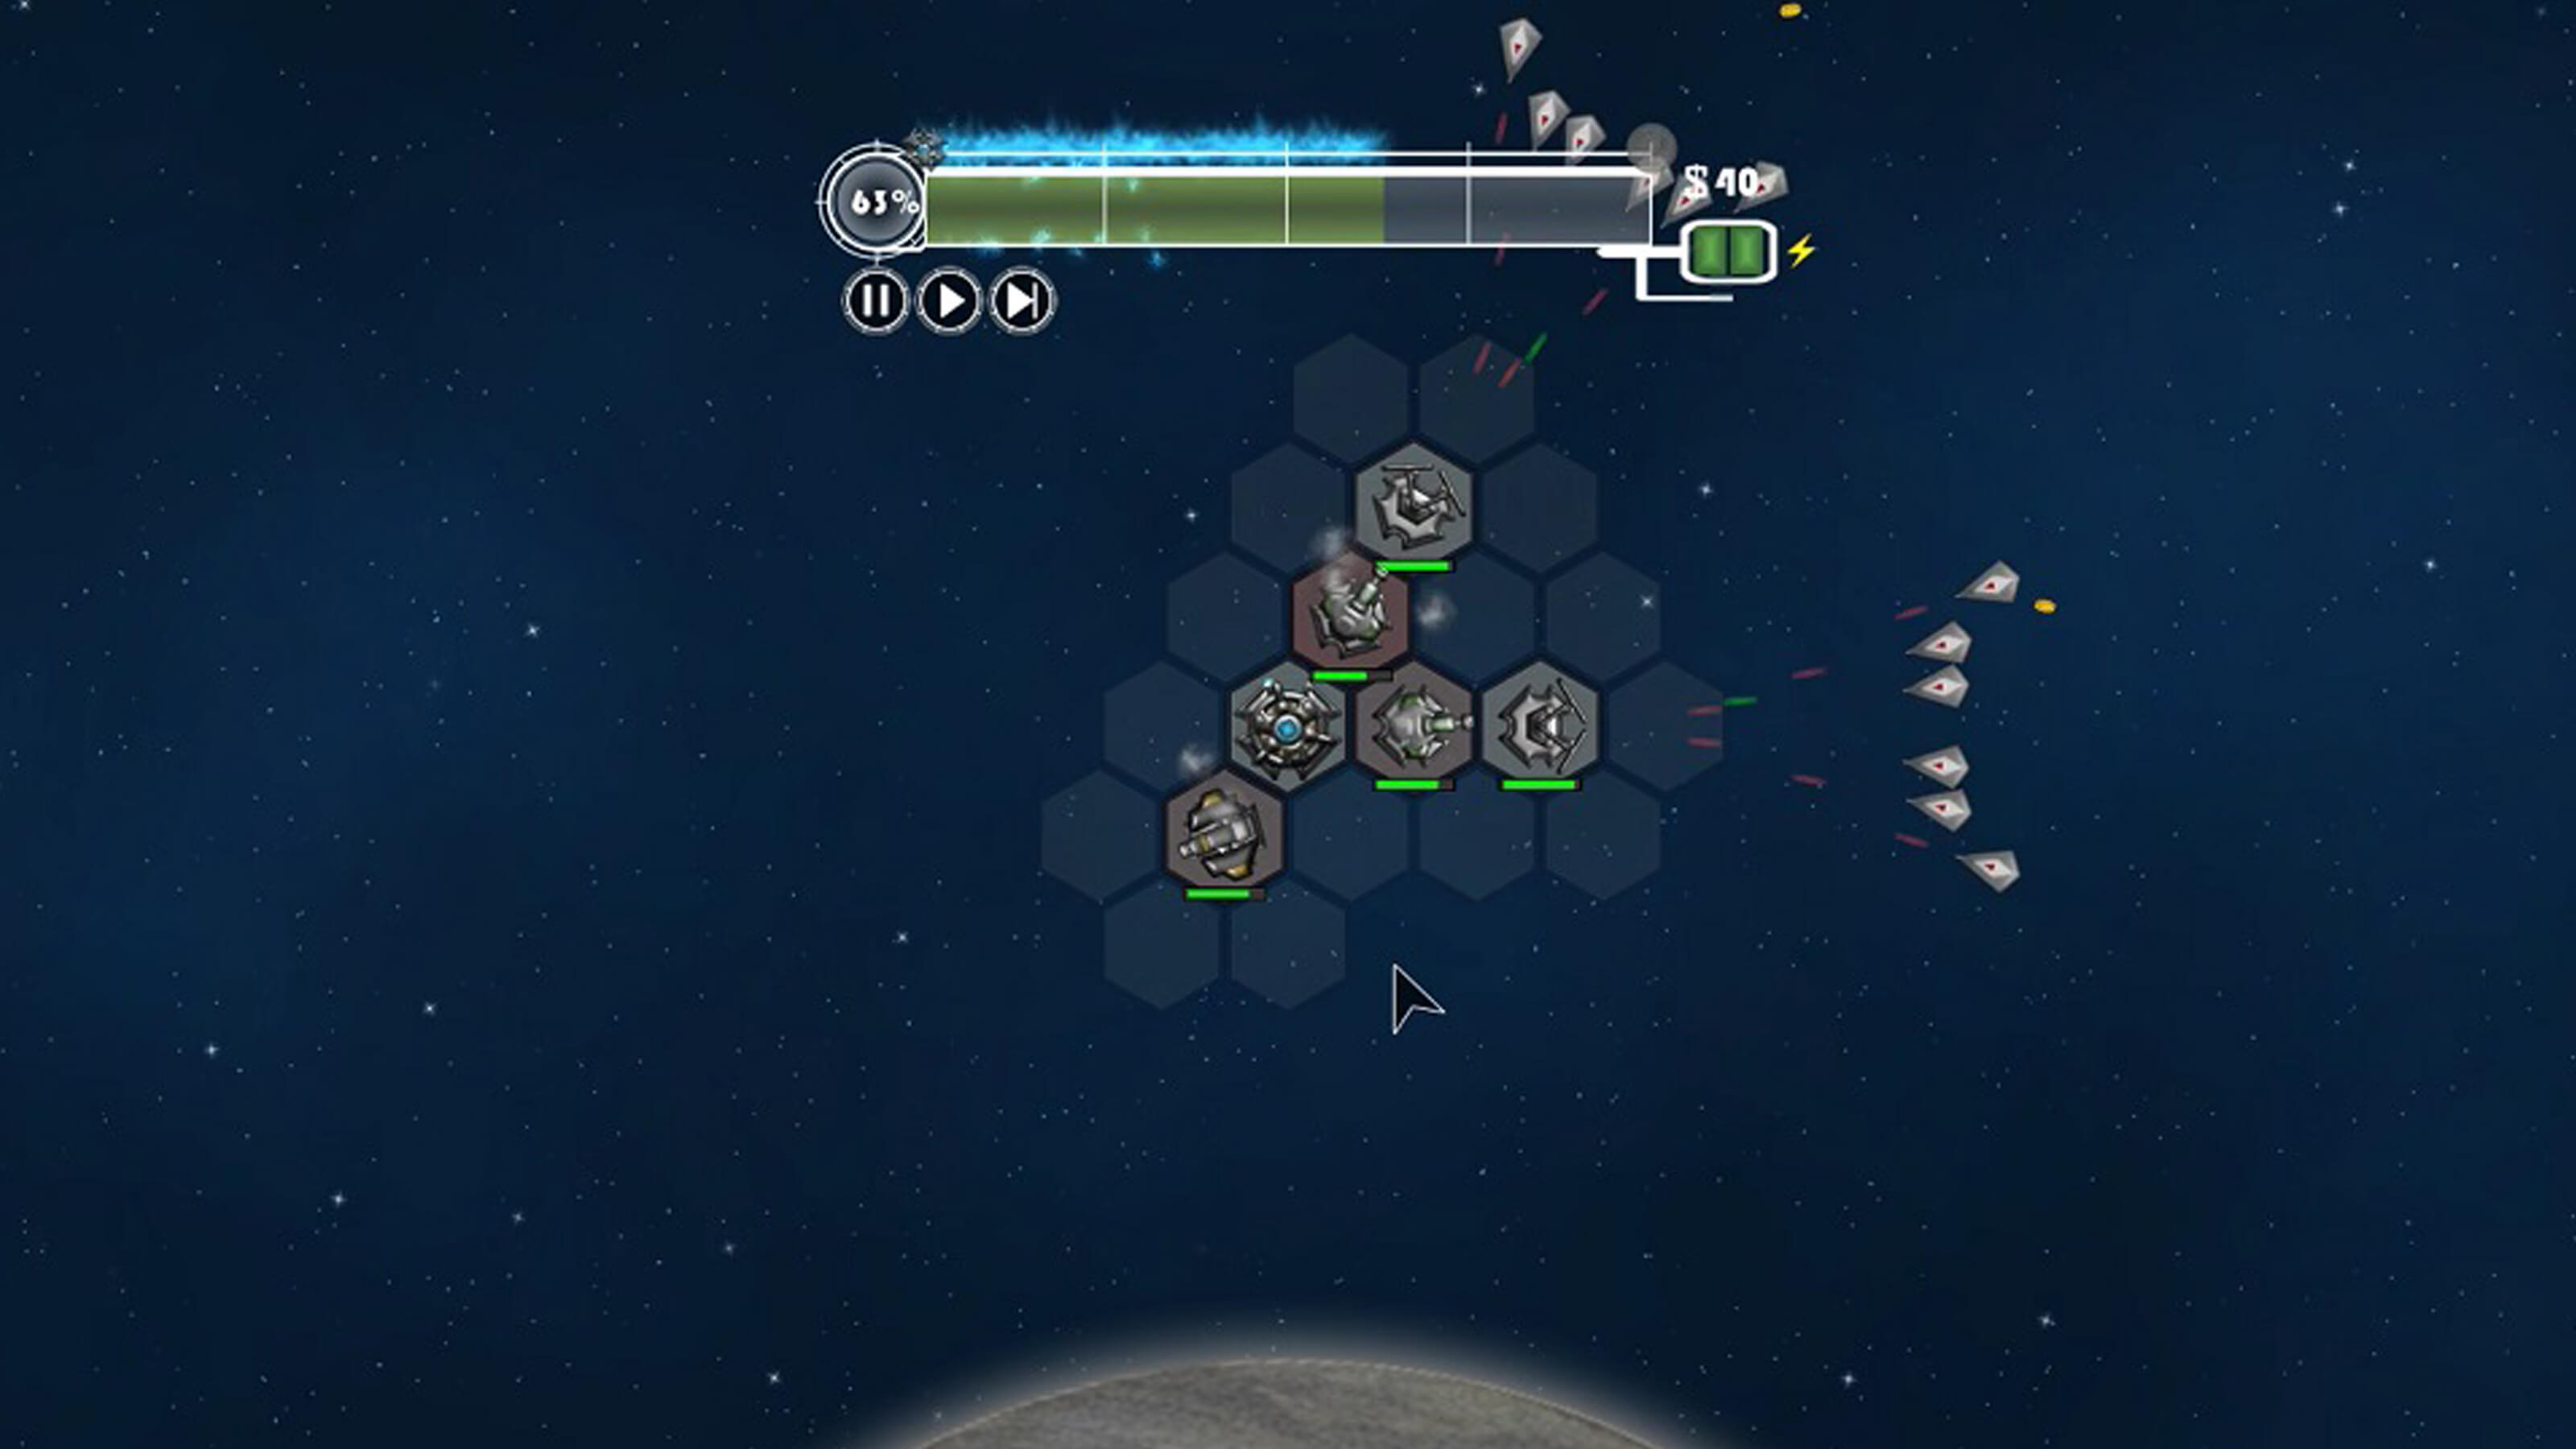 Six enemy ships converge and attack the defenses from the right-side of the screen